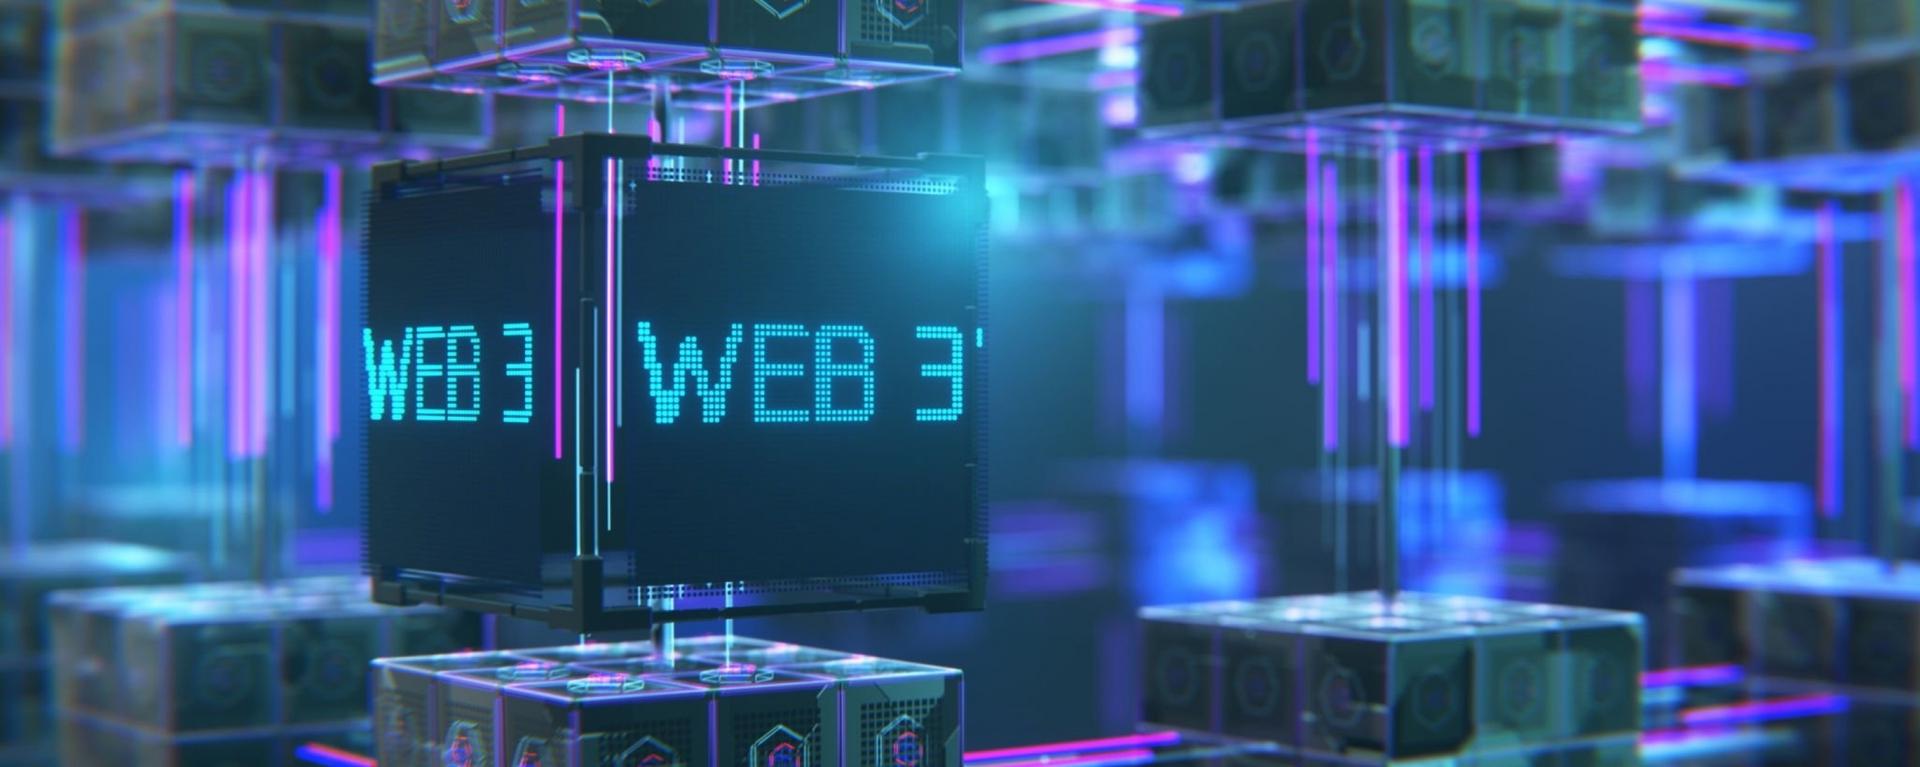 Shift from Web2 to Web3 with Metachain and Uncover the power of blockchain, decentralized finance, and the programmable economy.